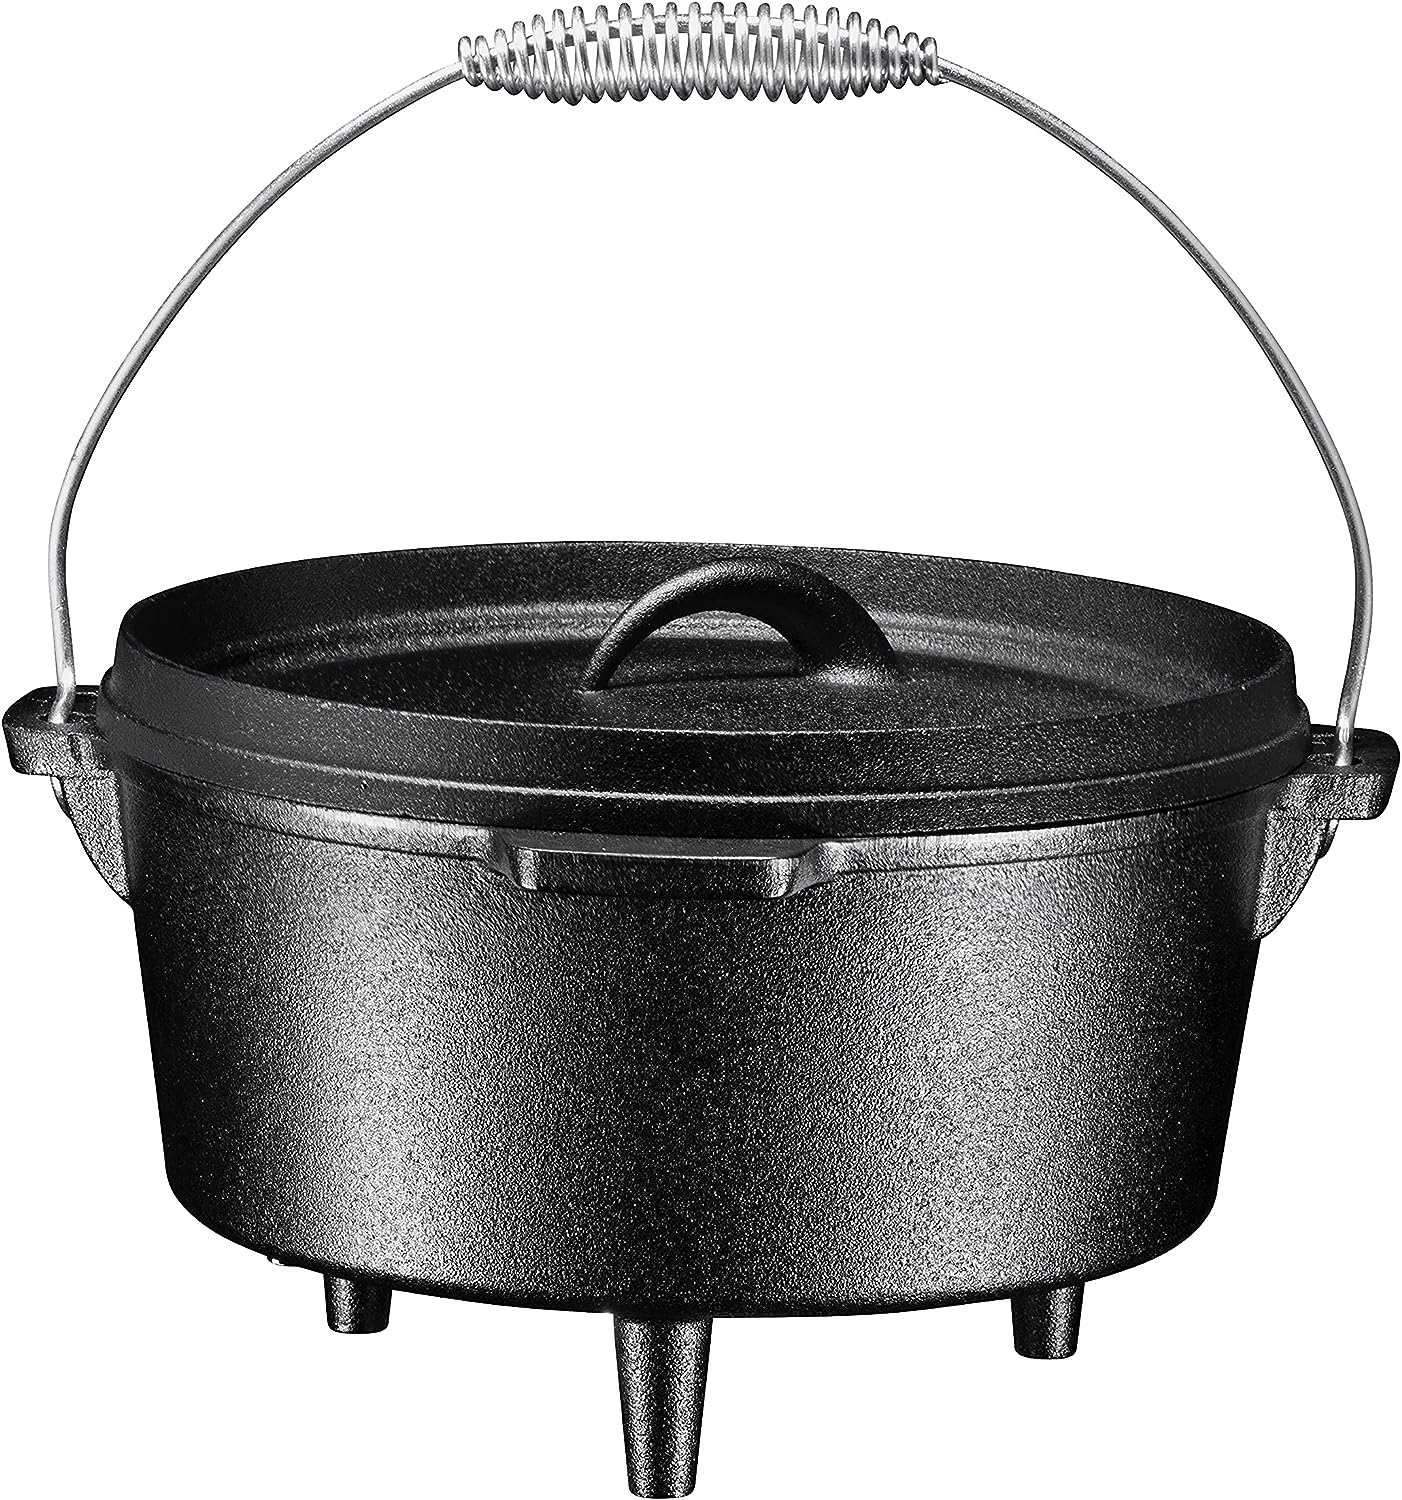 CAST IRON DUTCH OVEN WITH HANDLE